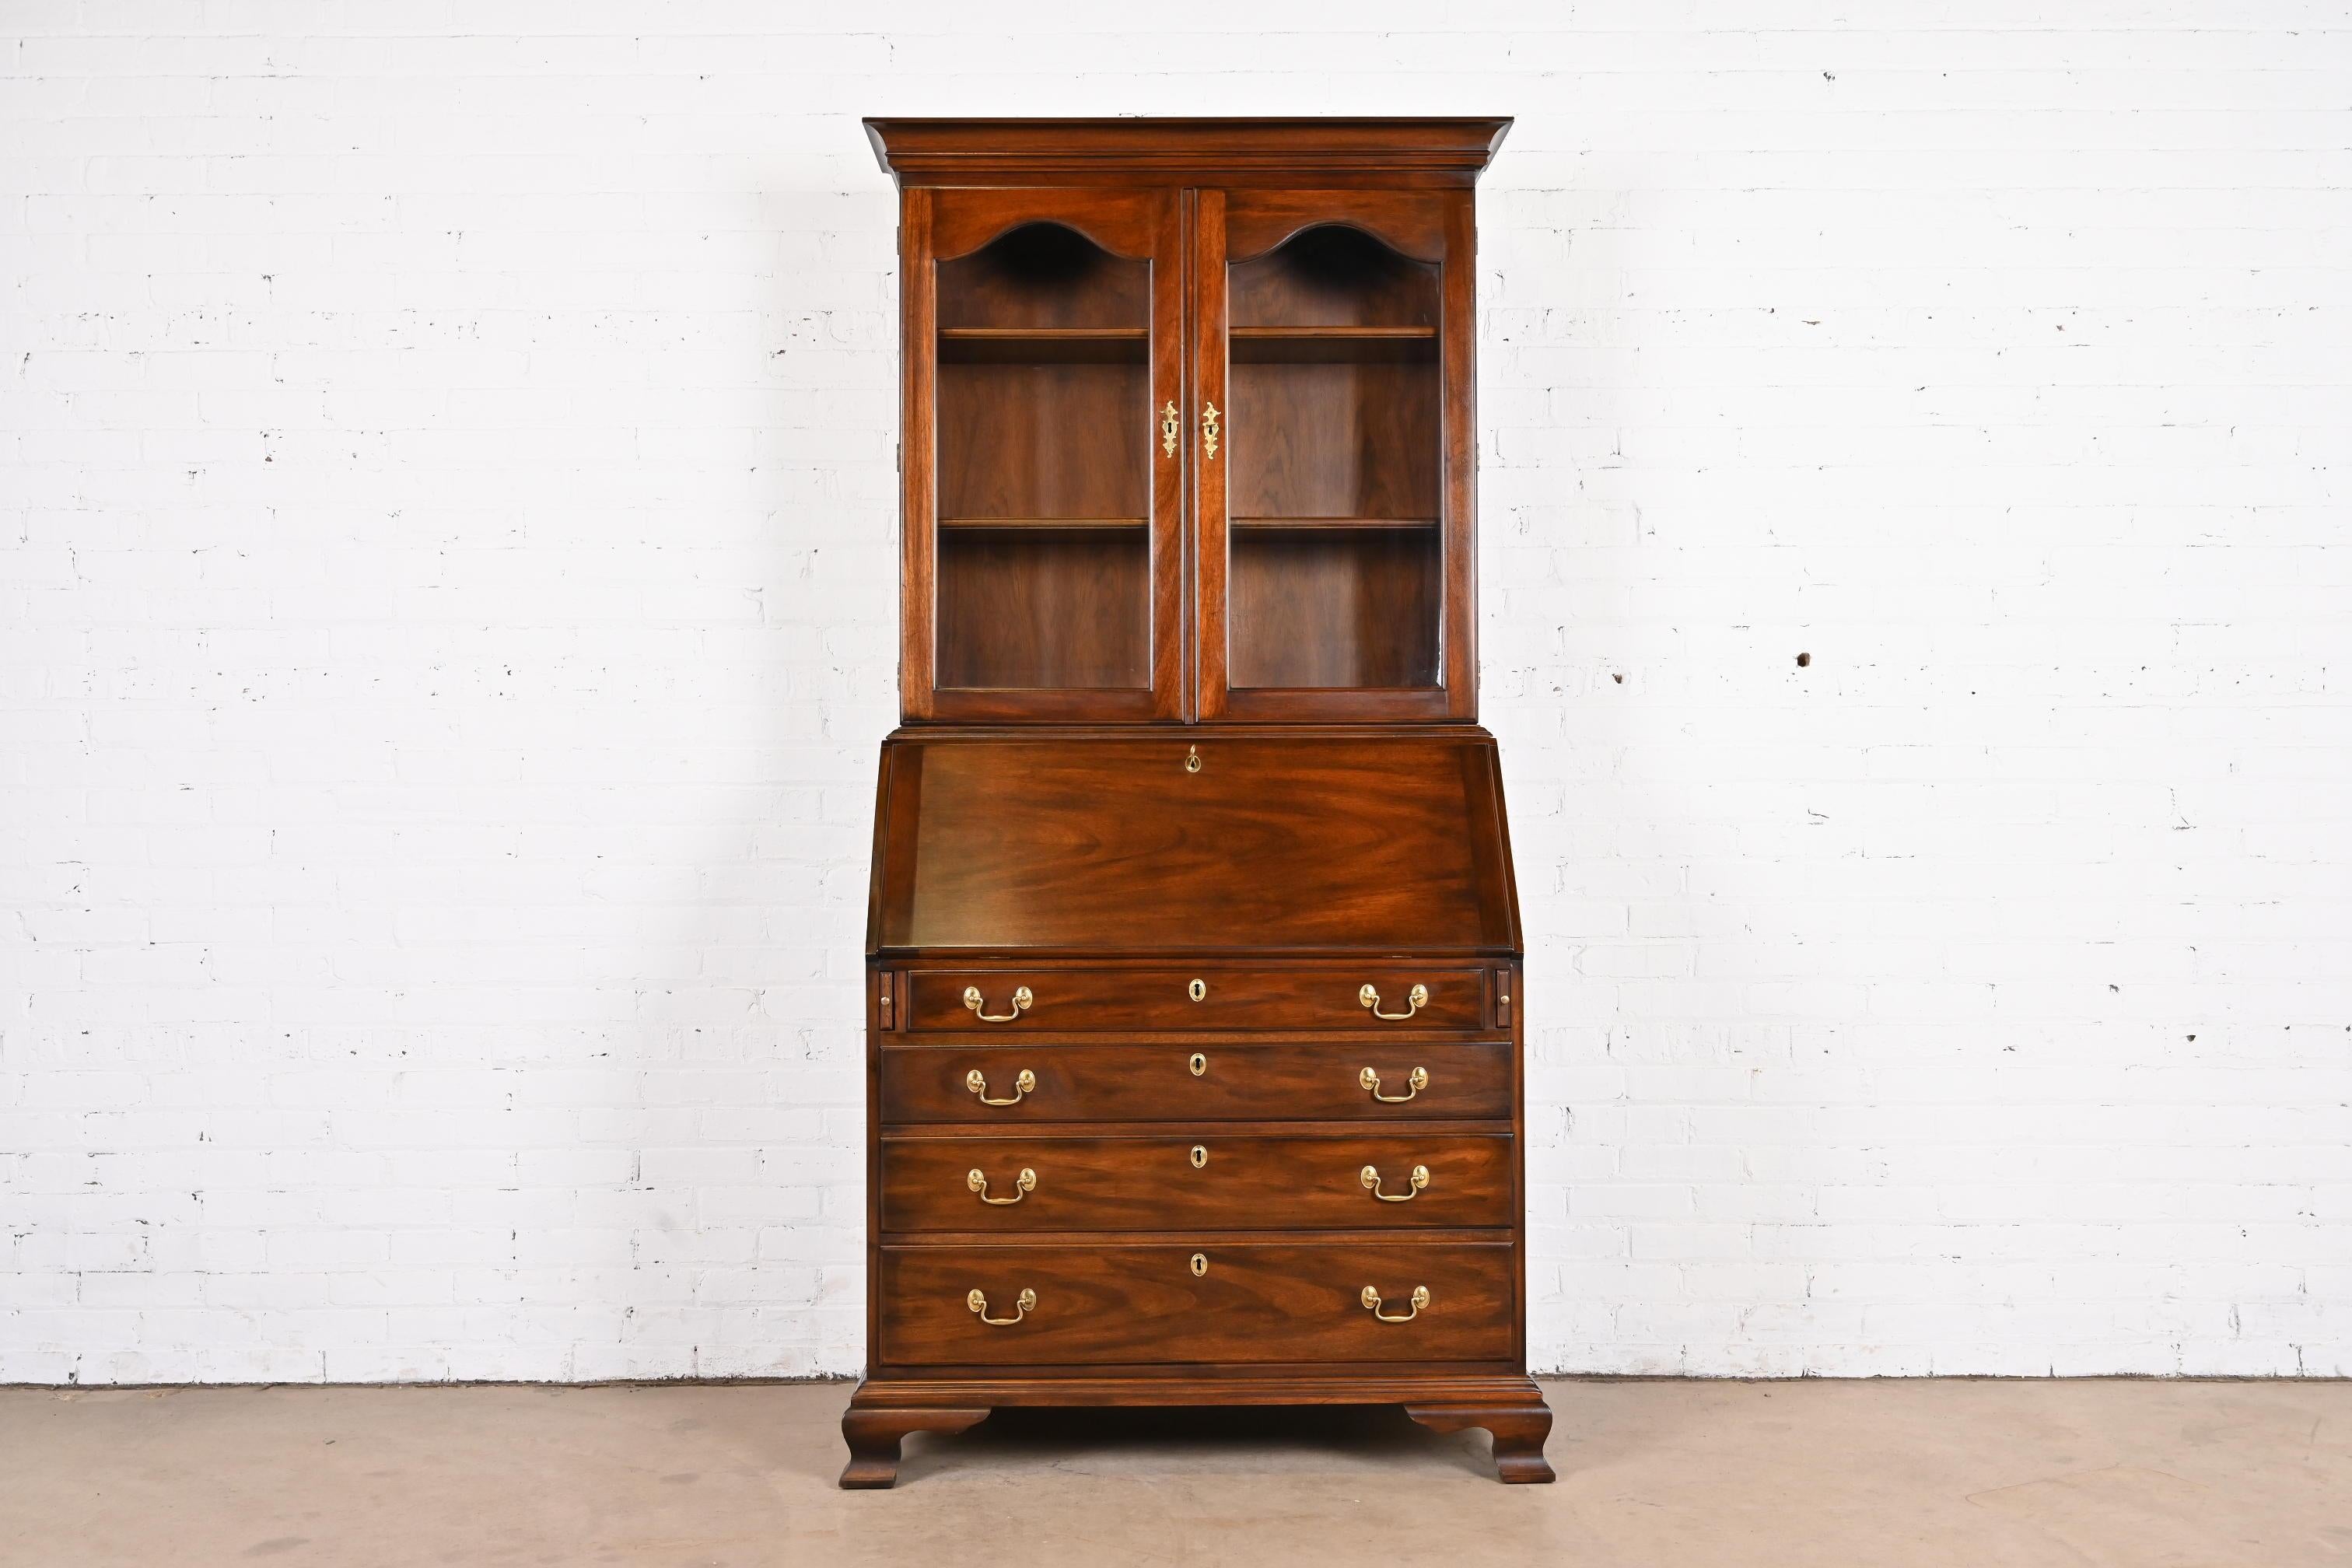 A gorgeous Georgian or Chippendale style bureau with drop front secretary desk and bookcase hutch top

By Henkel Harris

USA, 1970

Carved solid mahogany, with glass front doors and original brass hardware. Cabinet locks, and original key is